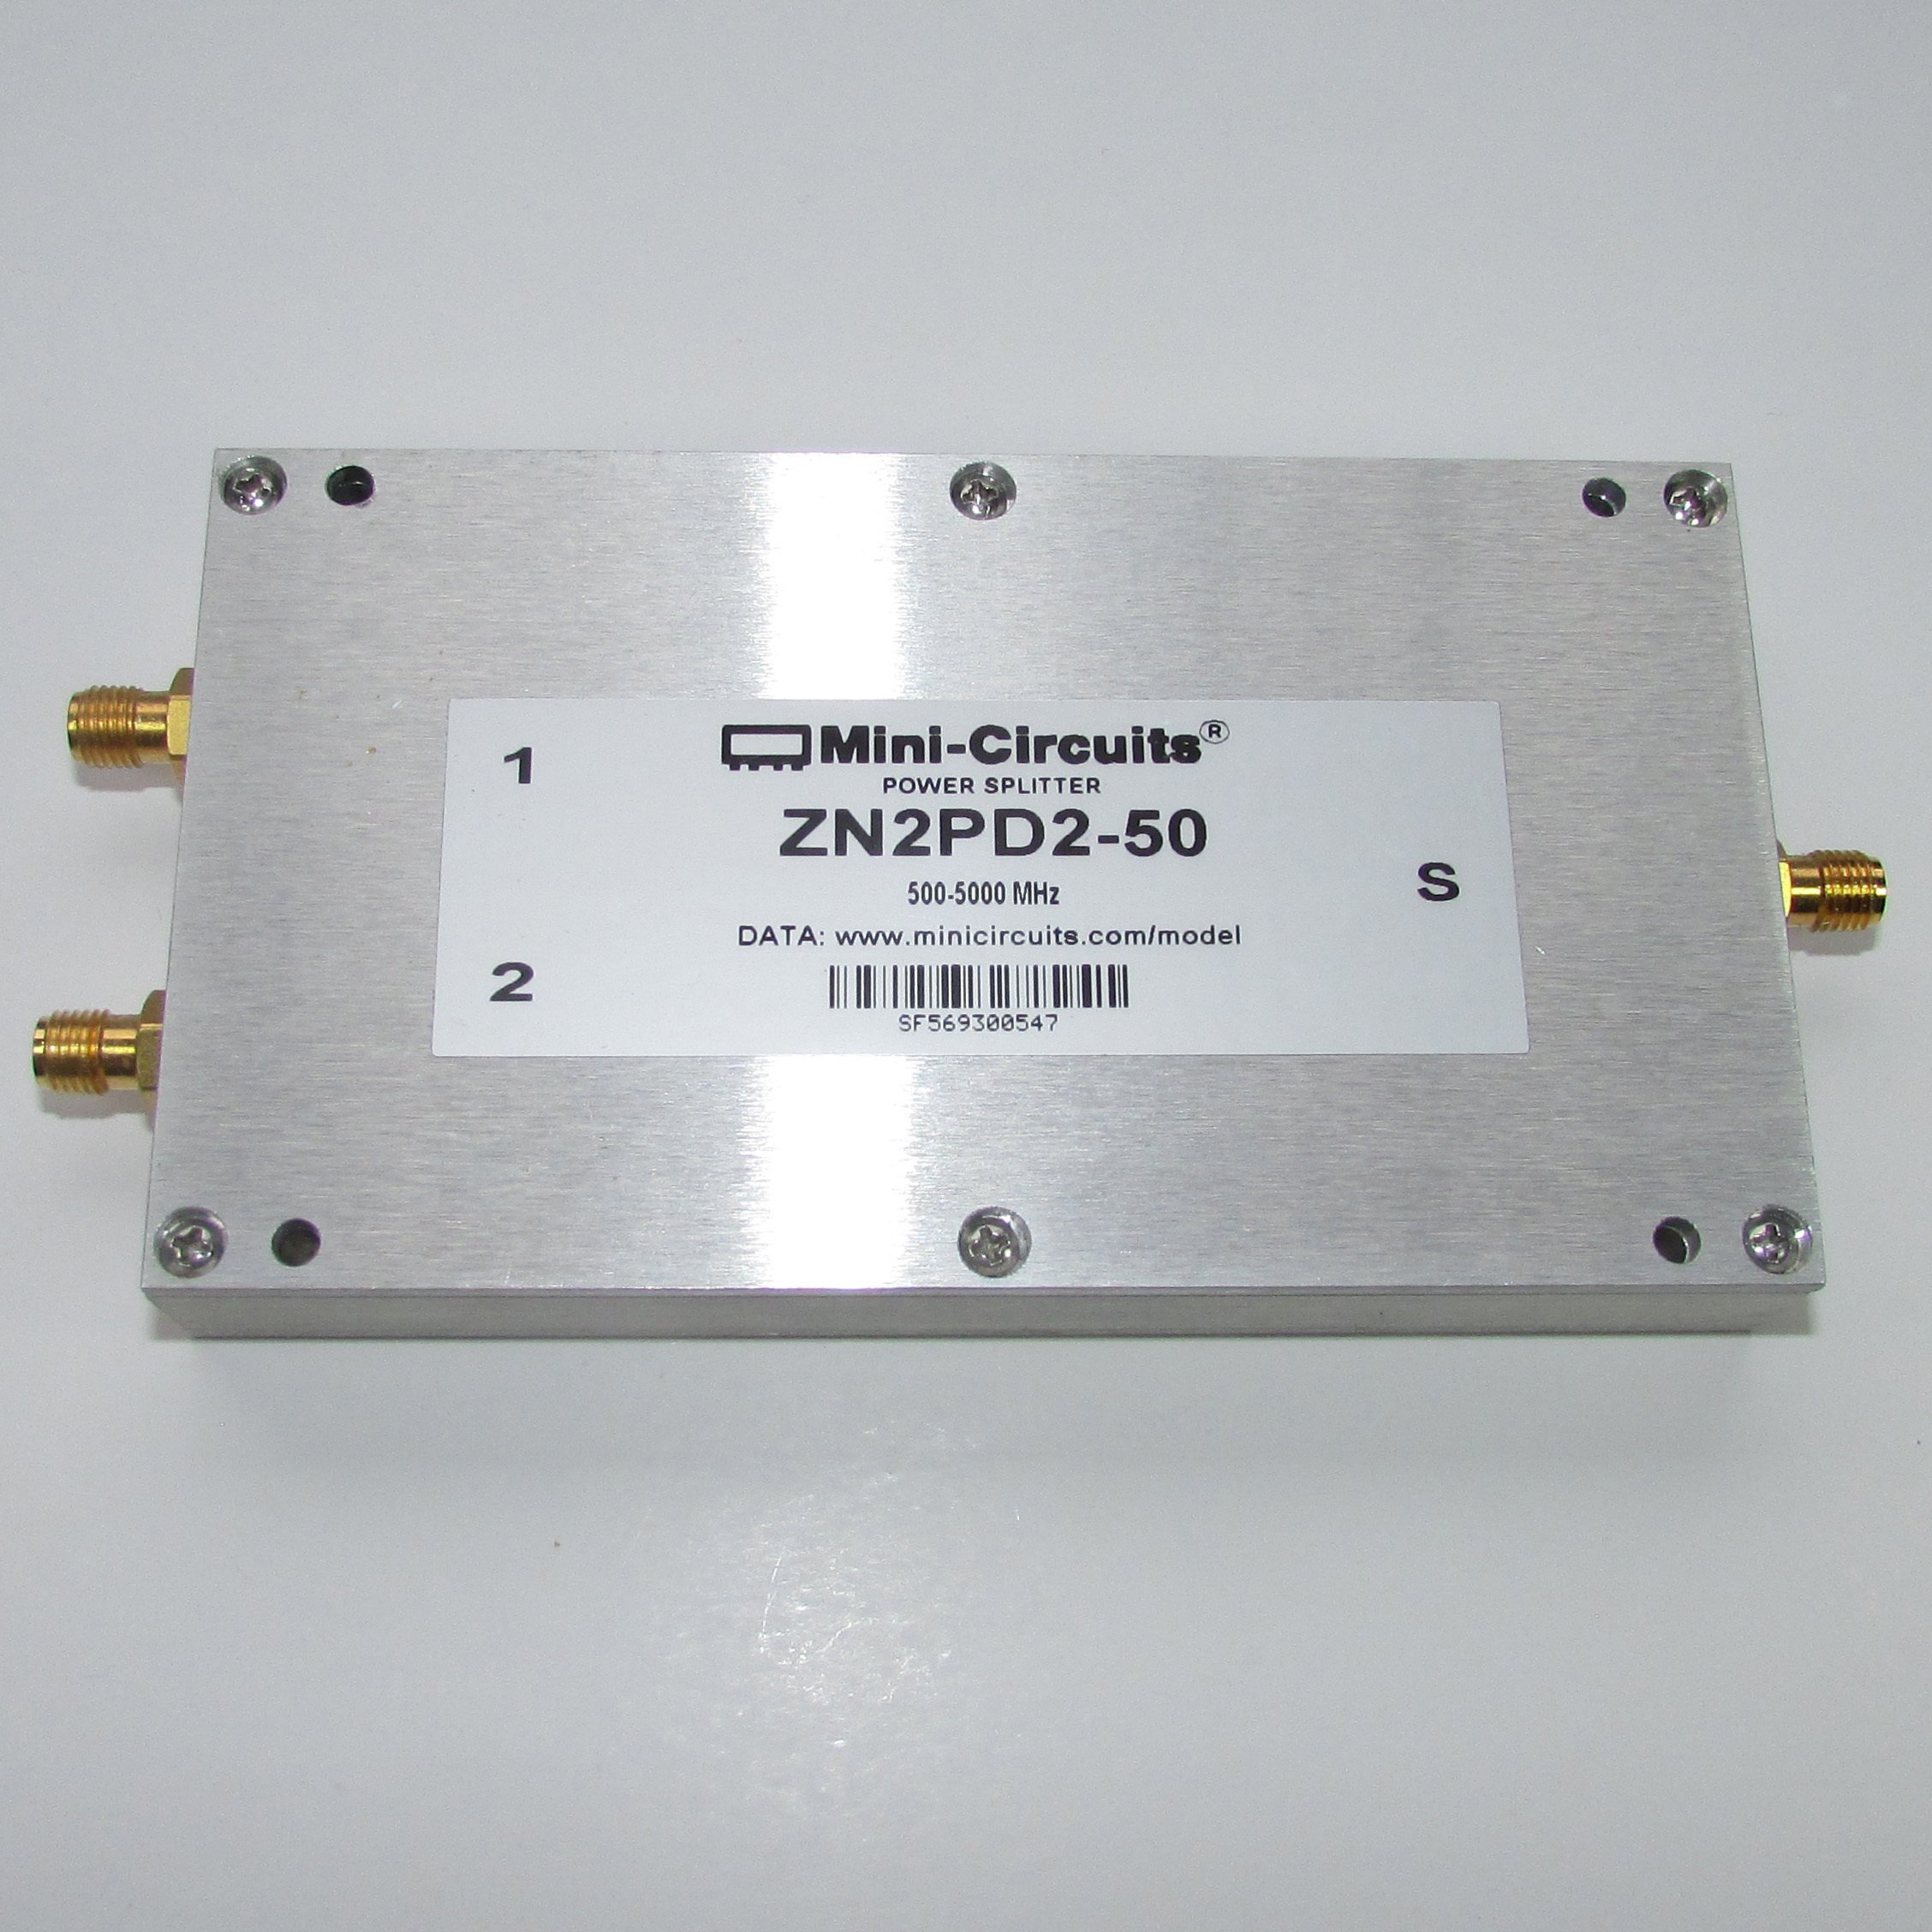 Mini-Circuits ZN2PD2-50 0.5-5GHz SMA RF microwave coaxial one minute two power divider